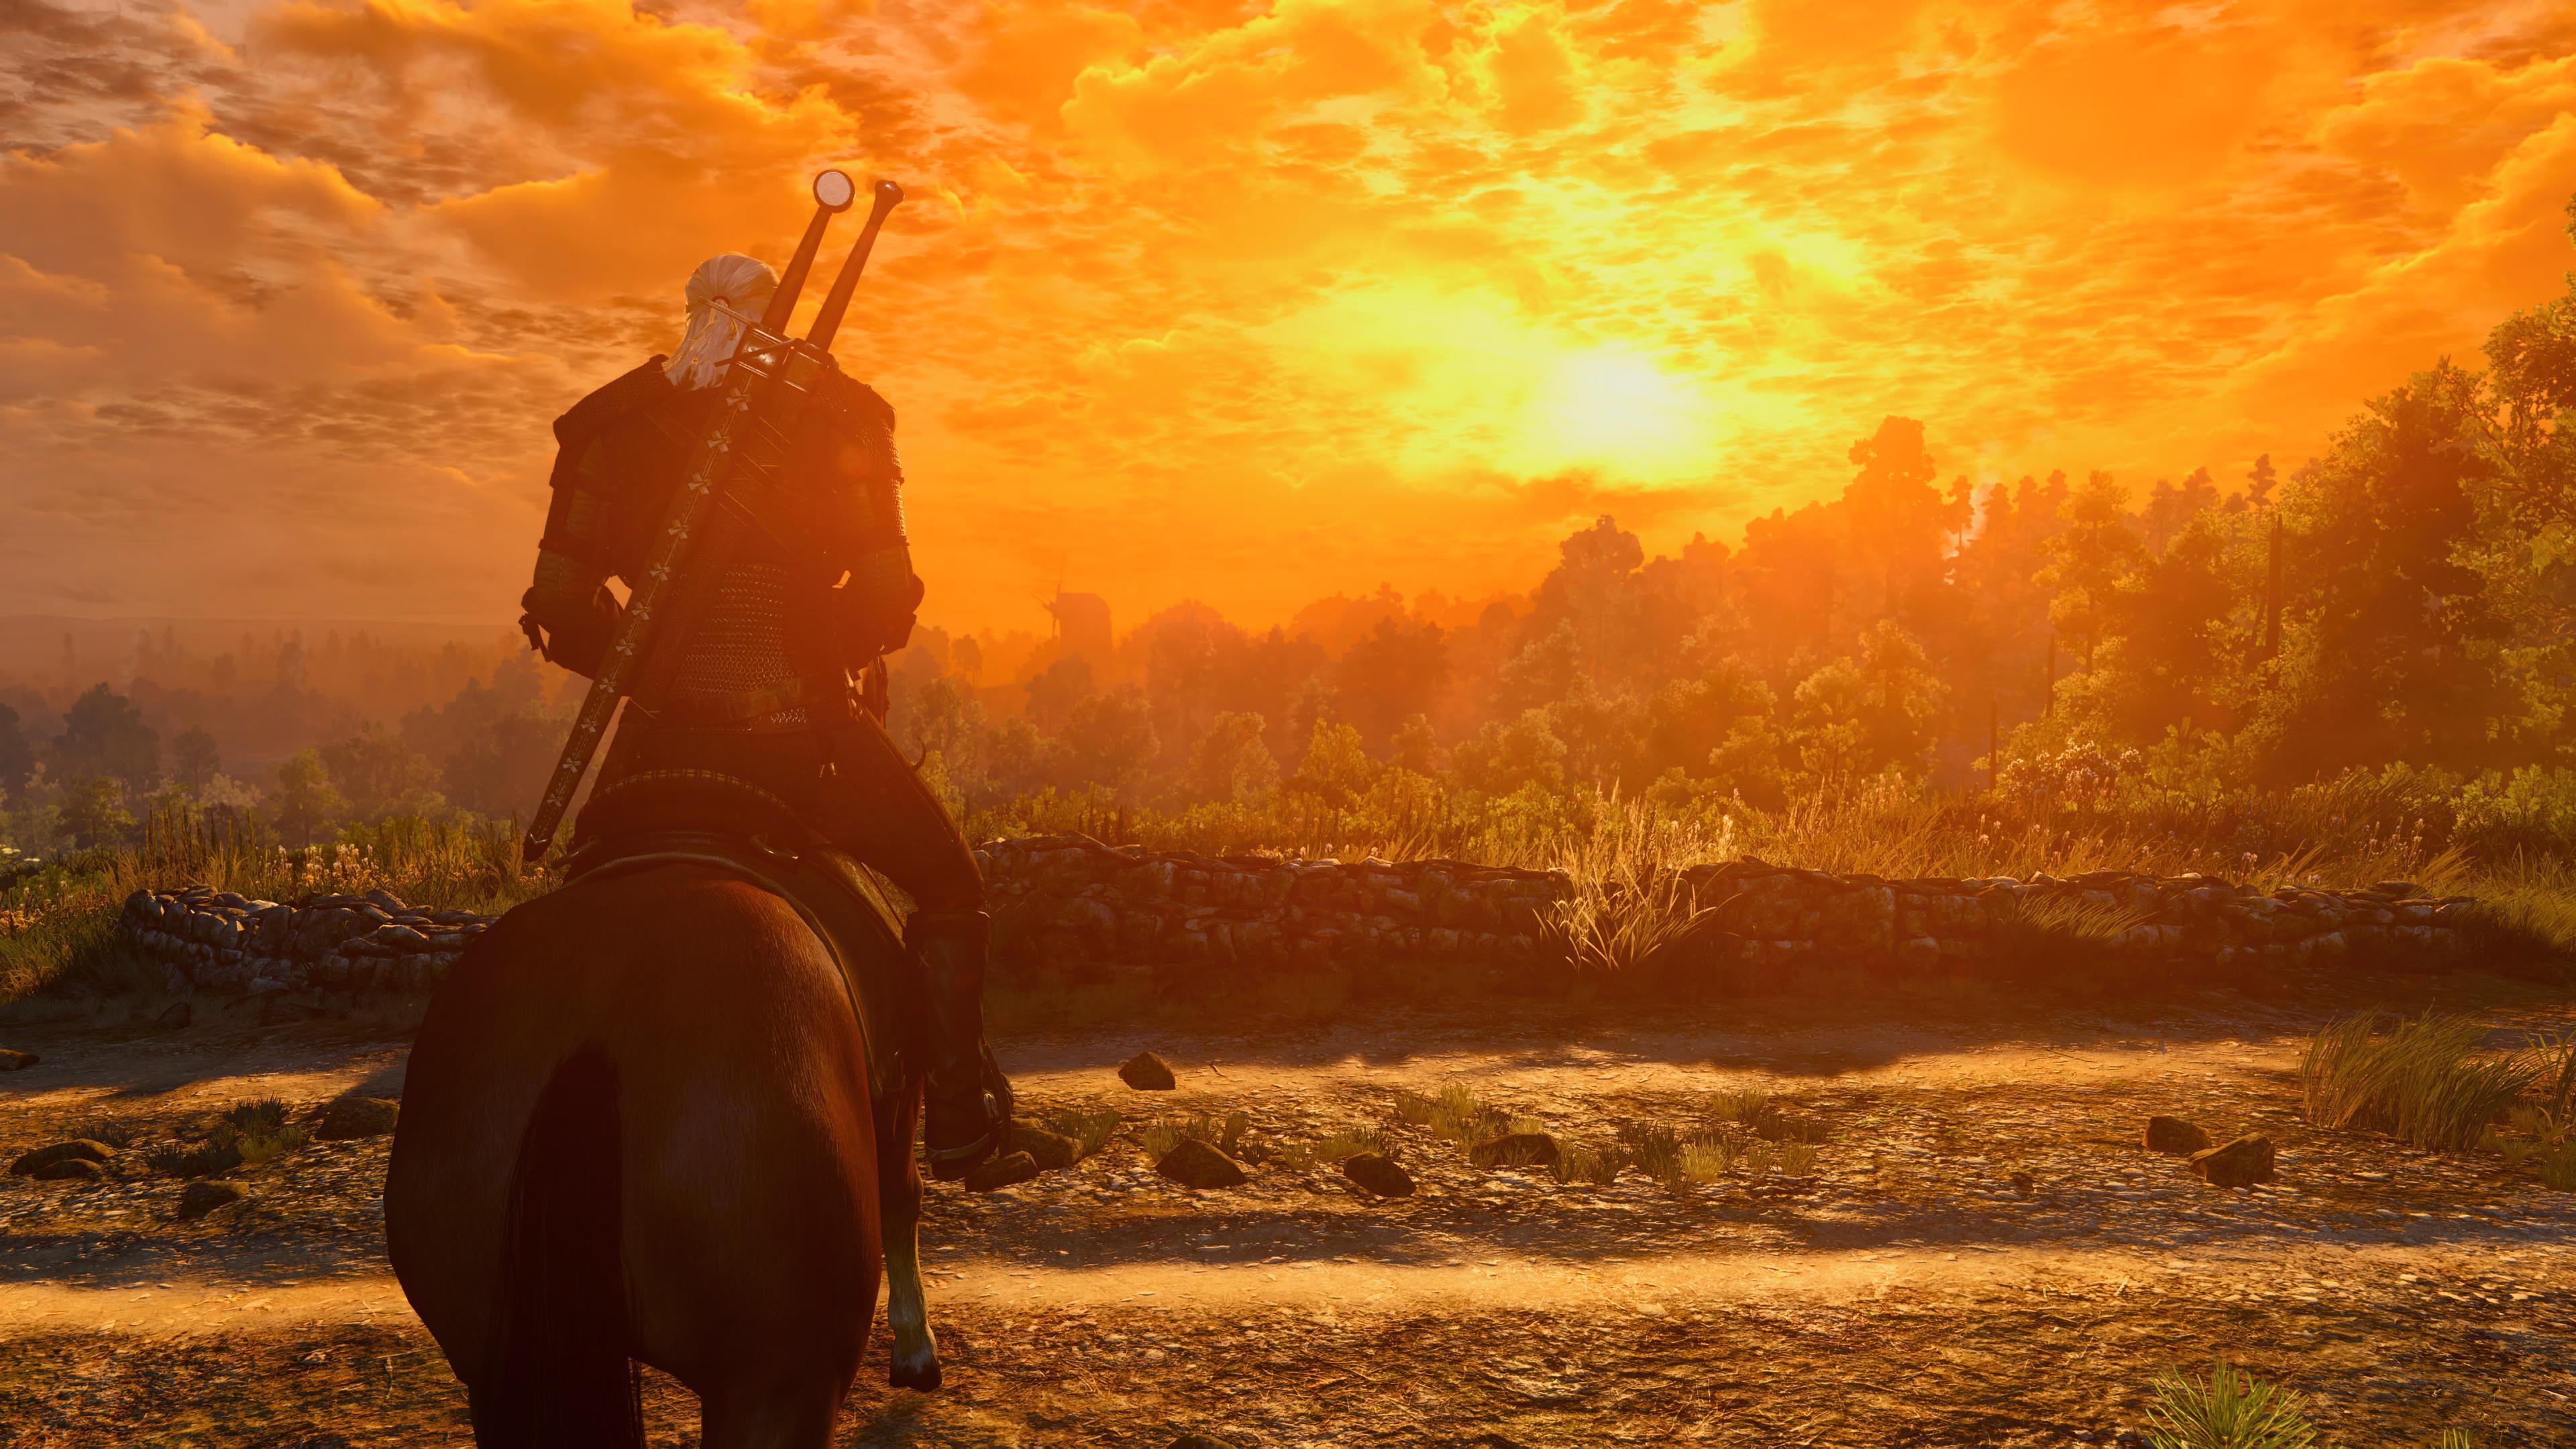 The witcher 3 next gen patch фото 95